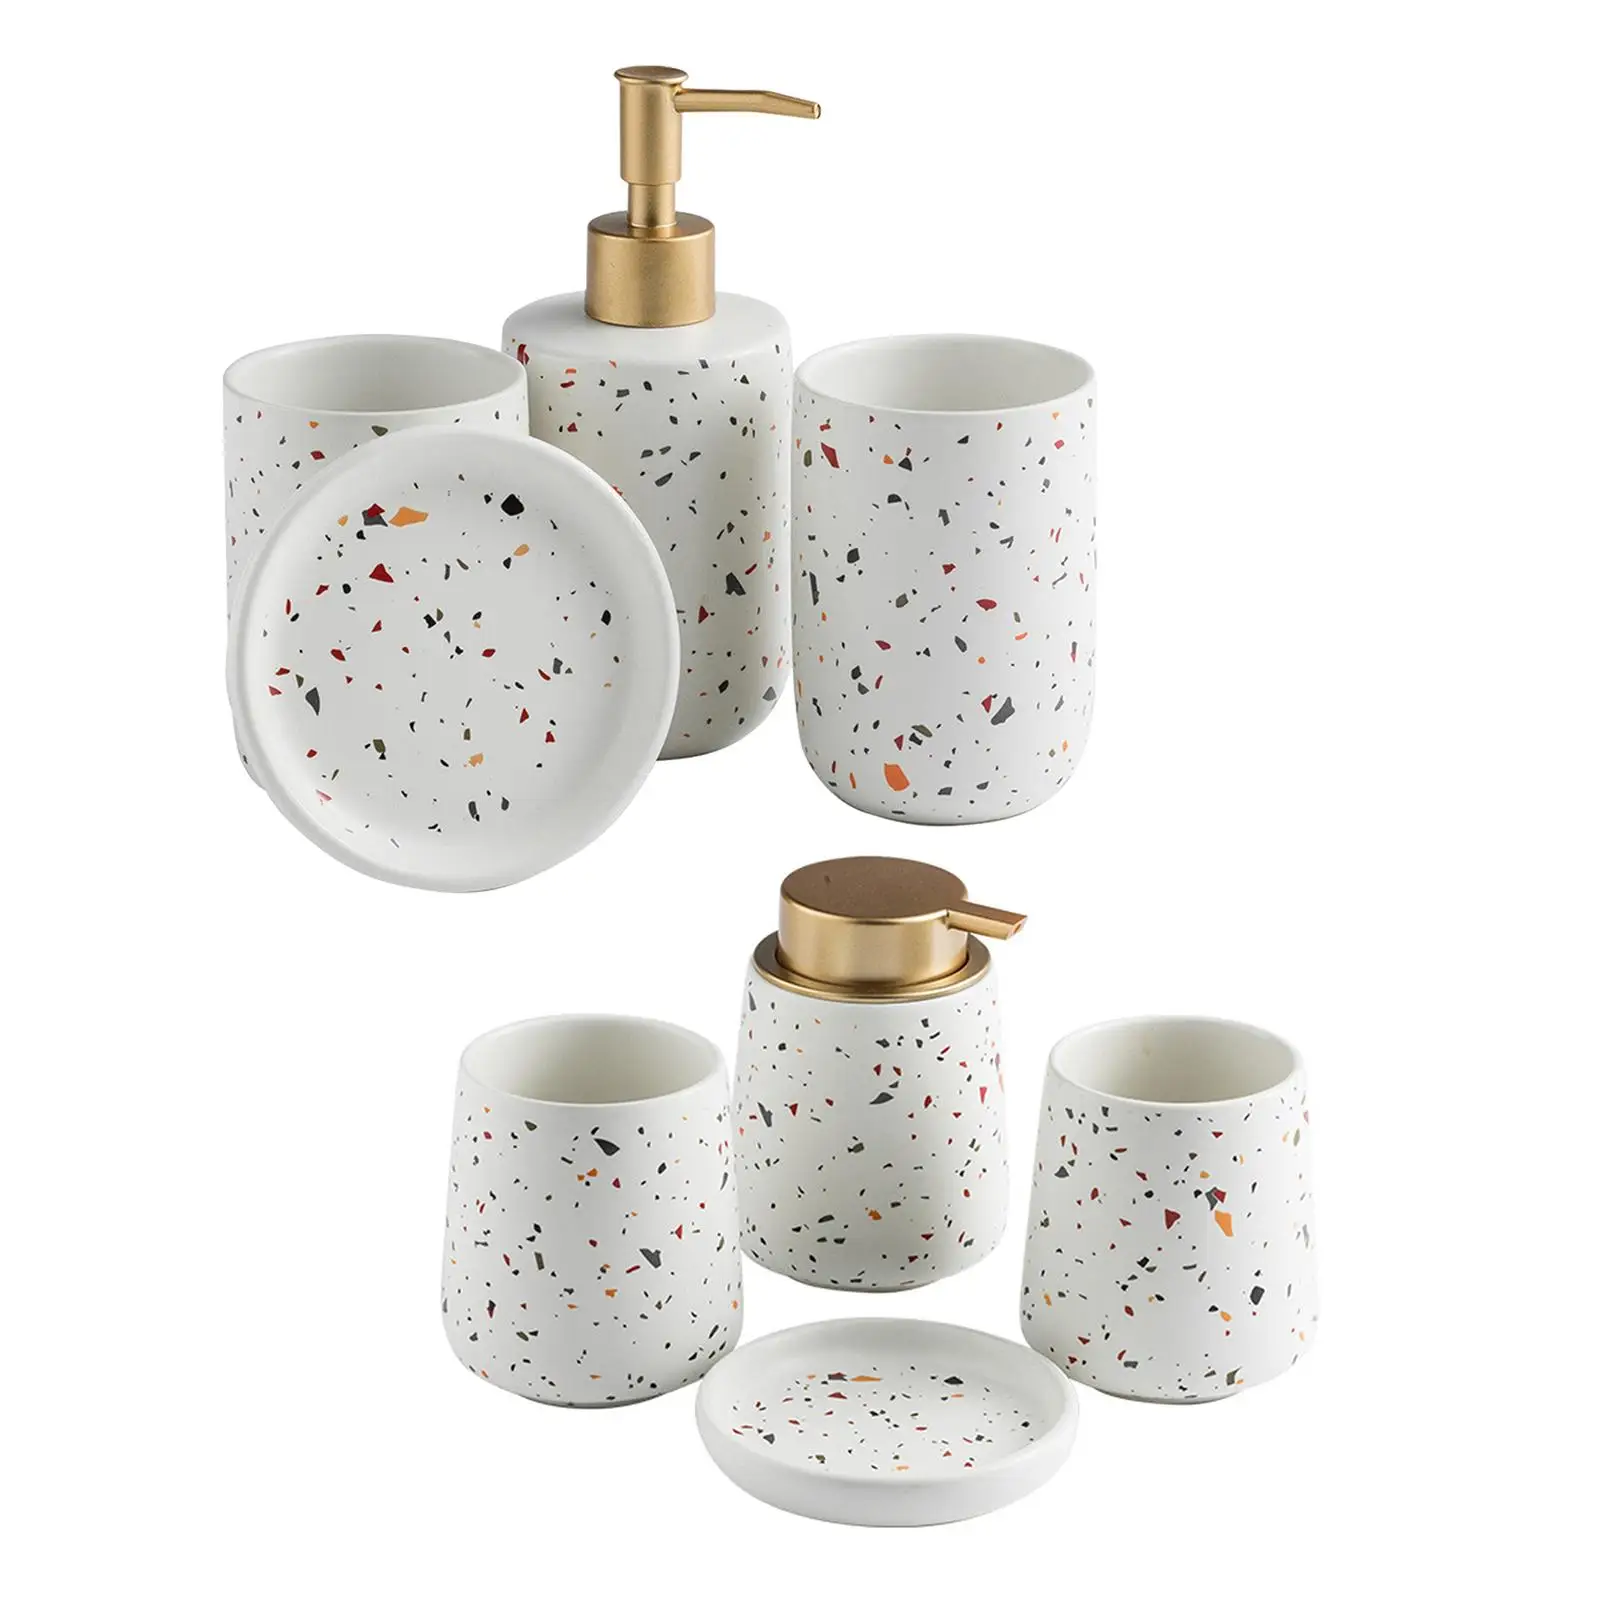 Ceramic Bathroom Accessories Set, Toothbrush Cup Soap Dish Lotion Bottle Mouth Cup Bath  Stuff for Bathroom Decoration